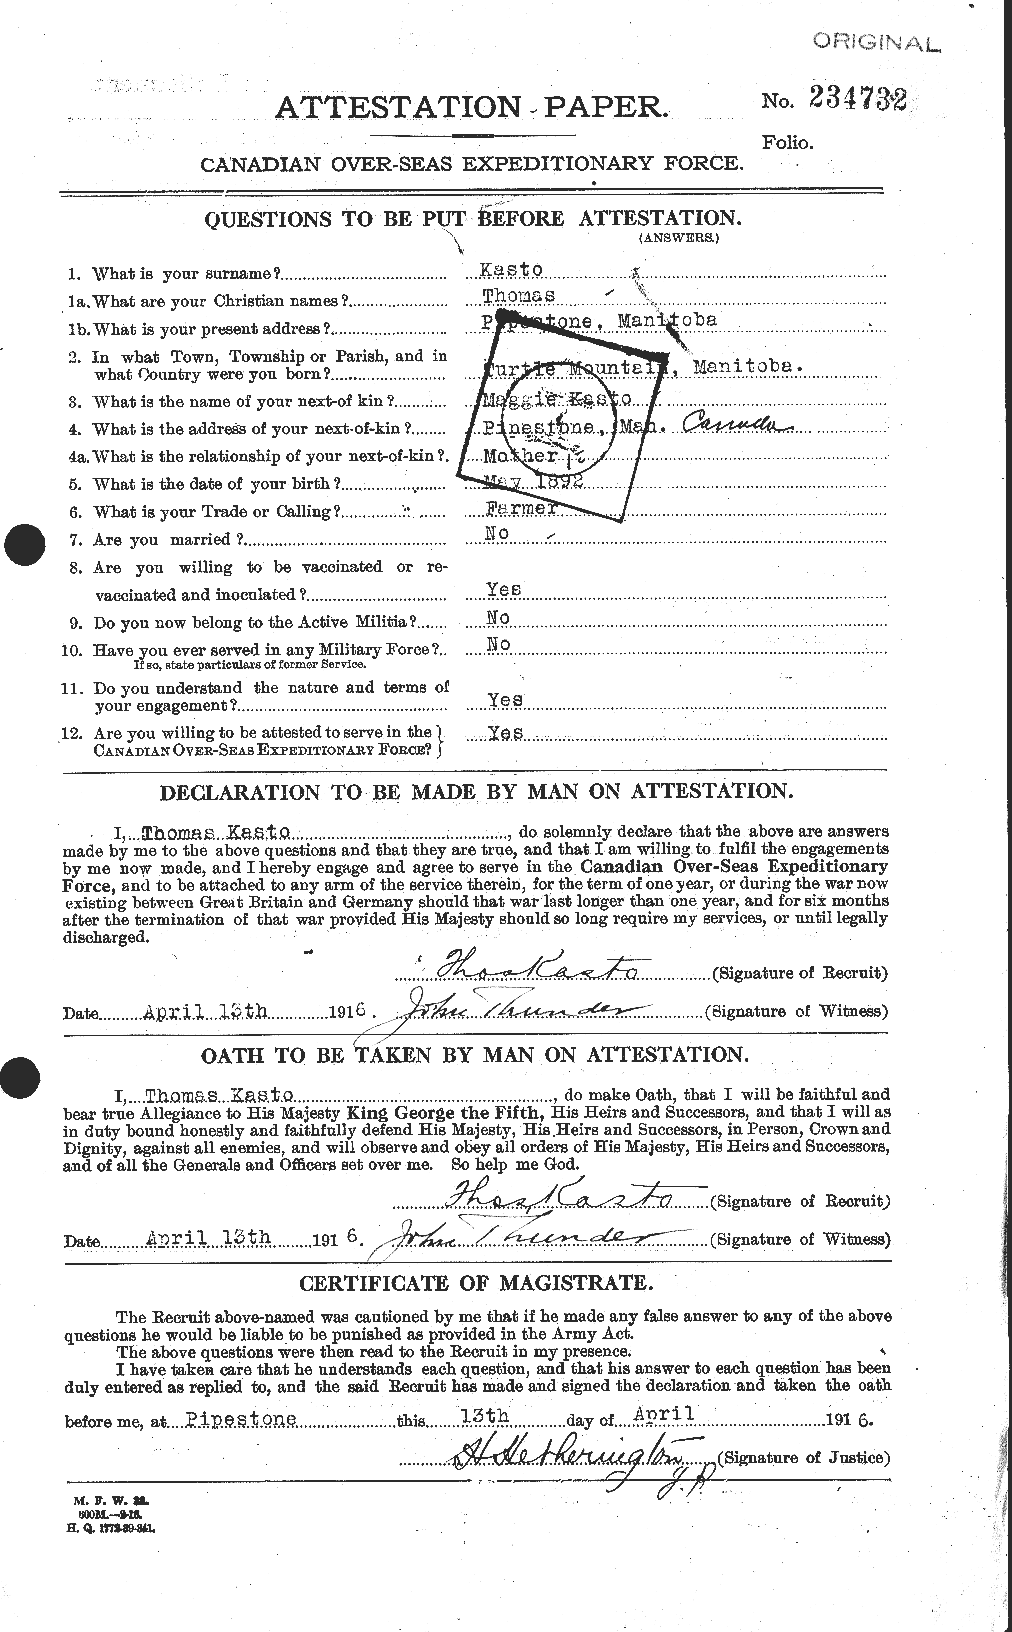 Personnel Records of the First World War - CEF 425682a